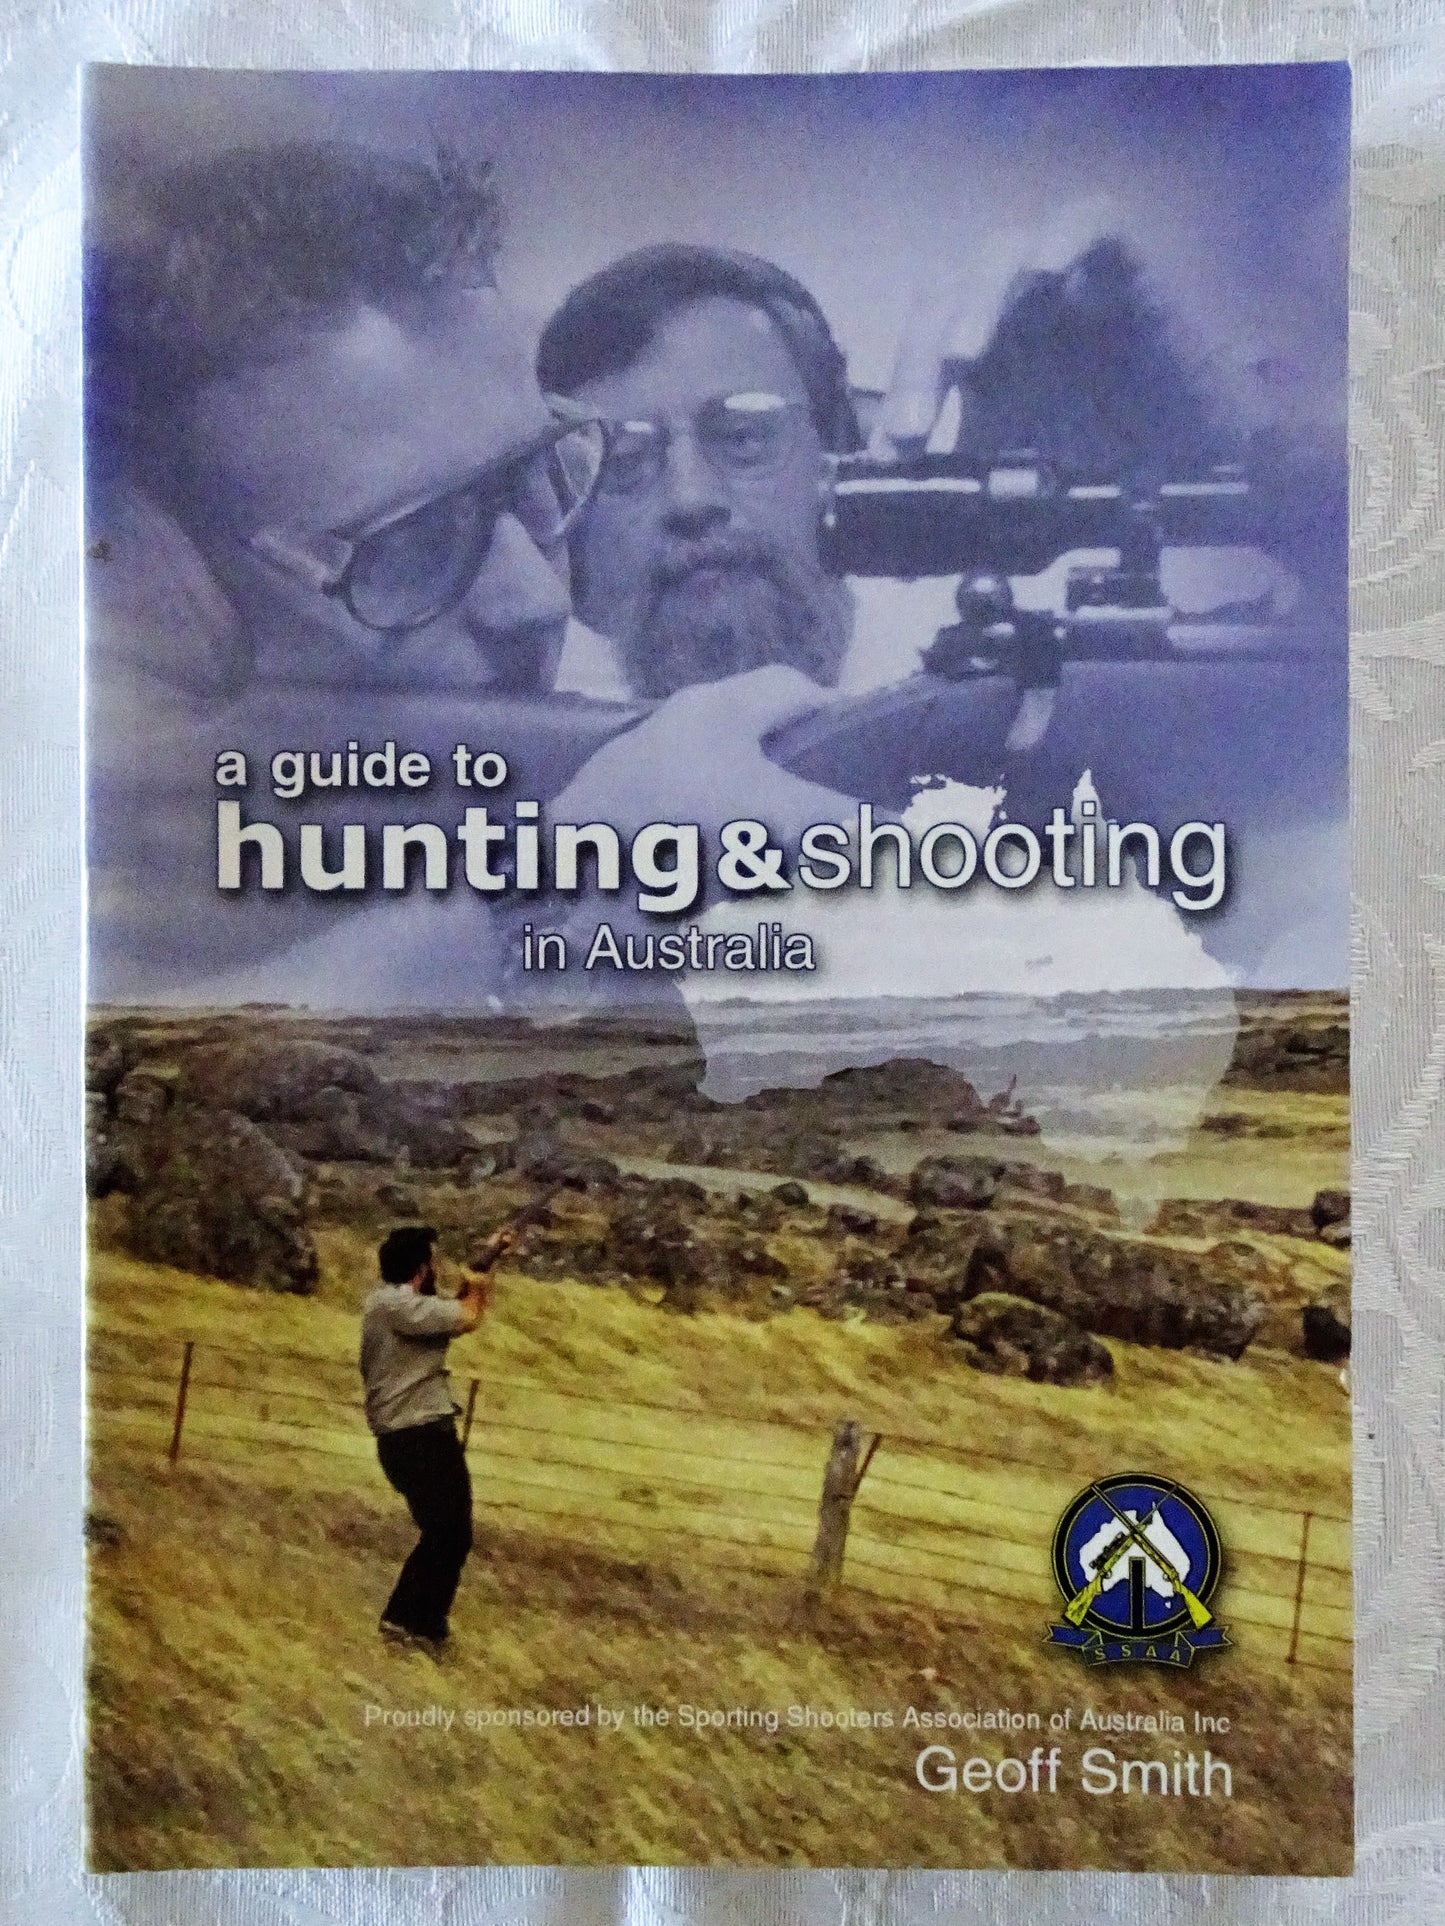 A Guide to Hunting & Shooting in Australia by Geoff Smith